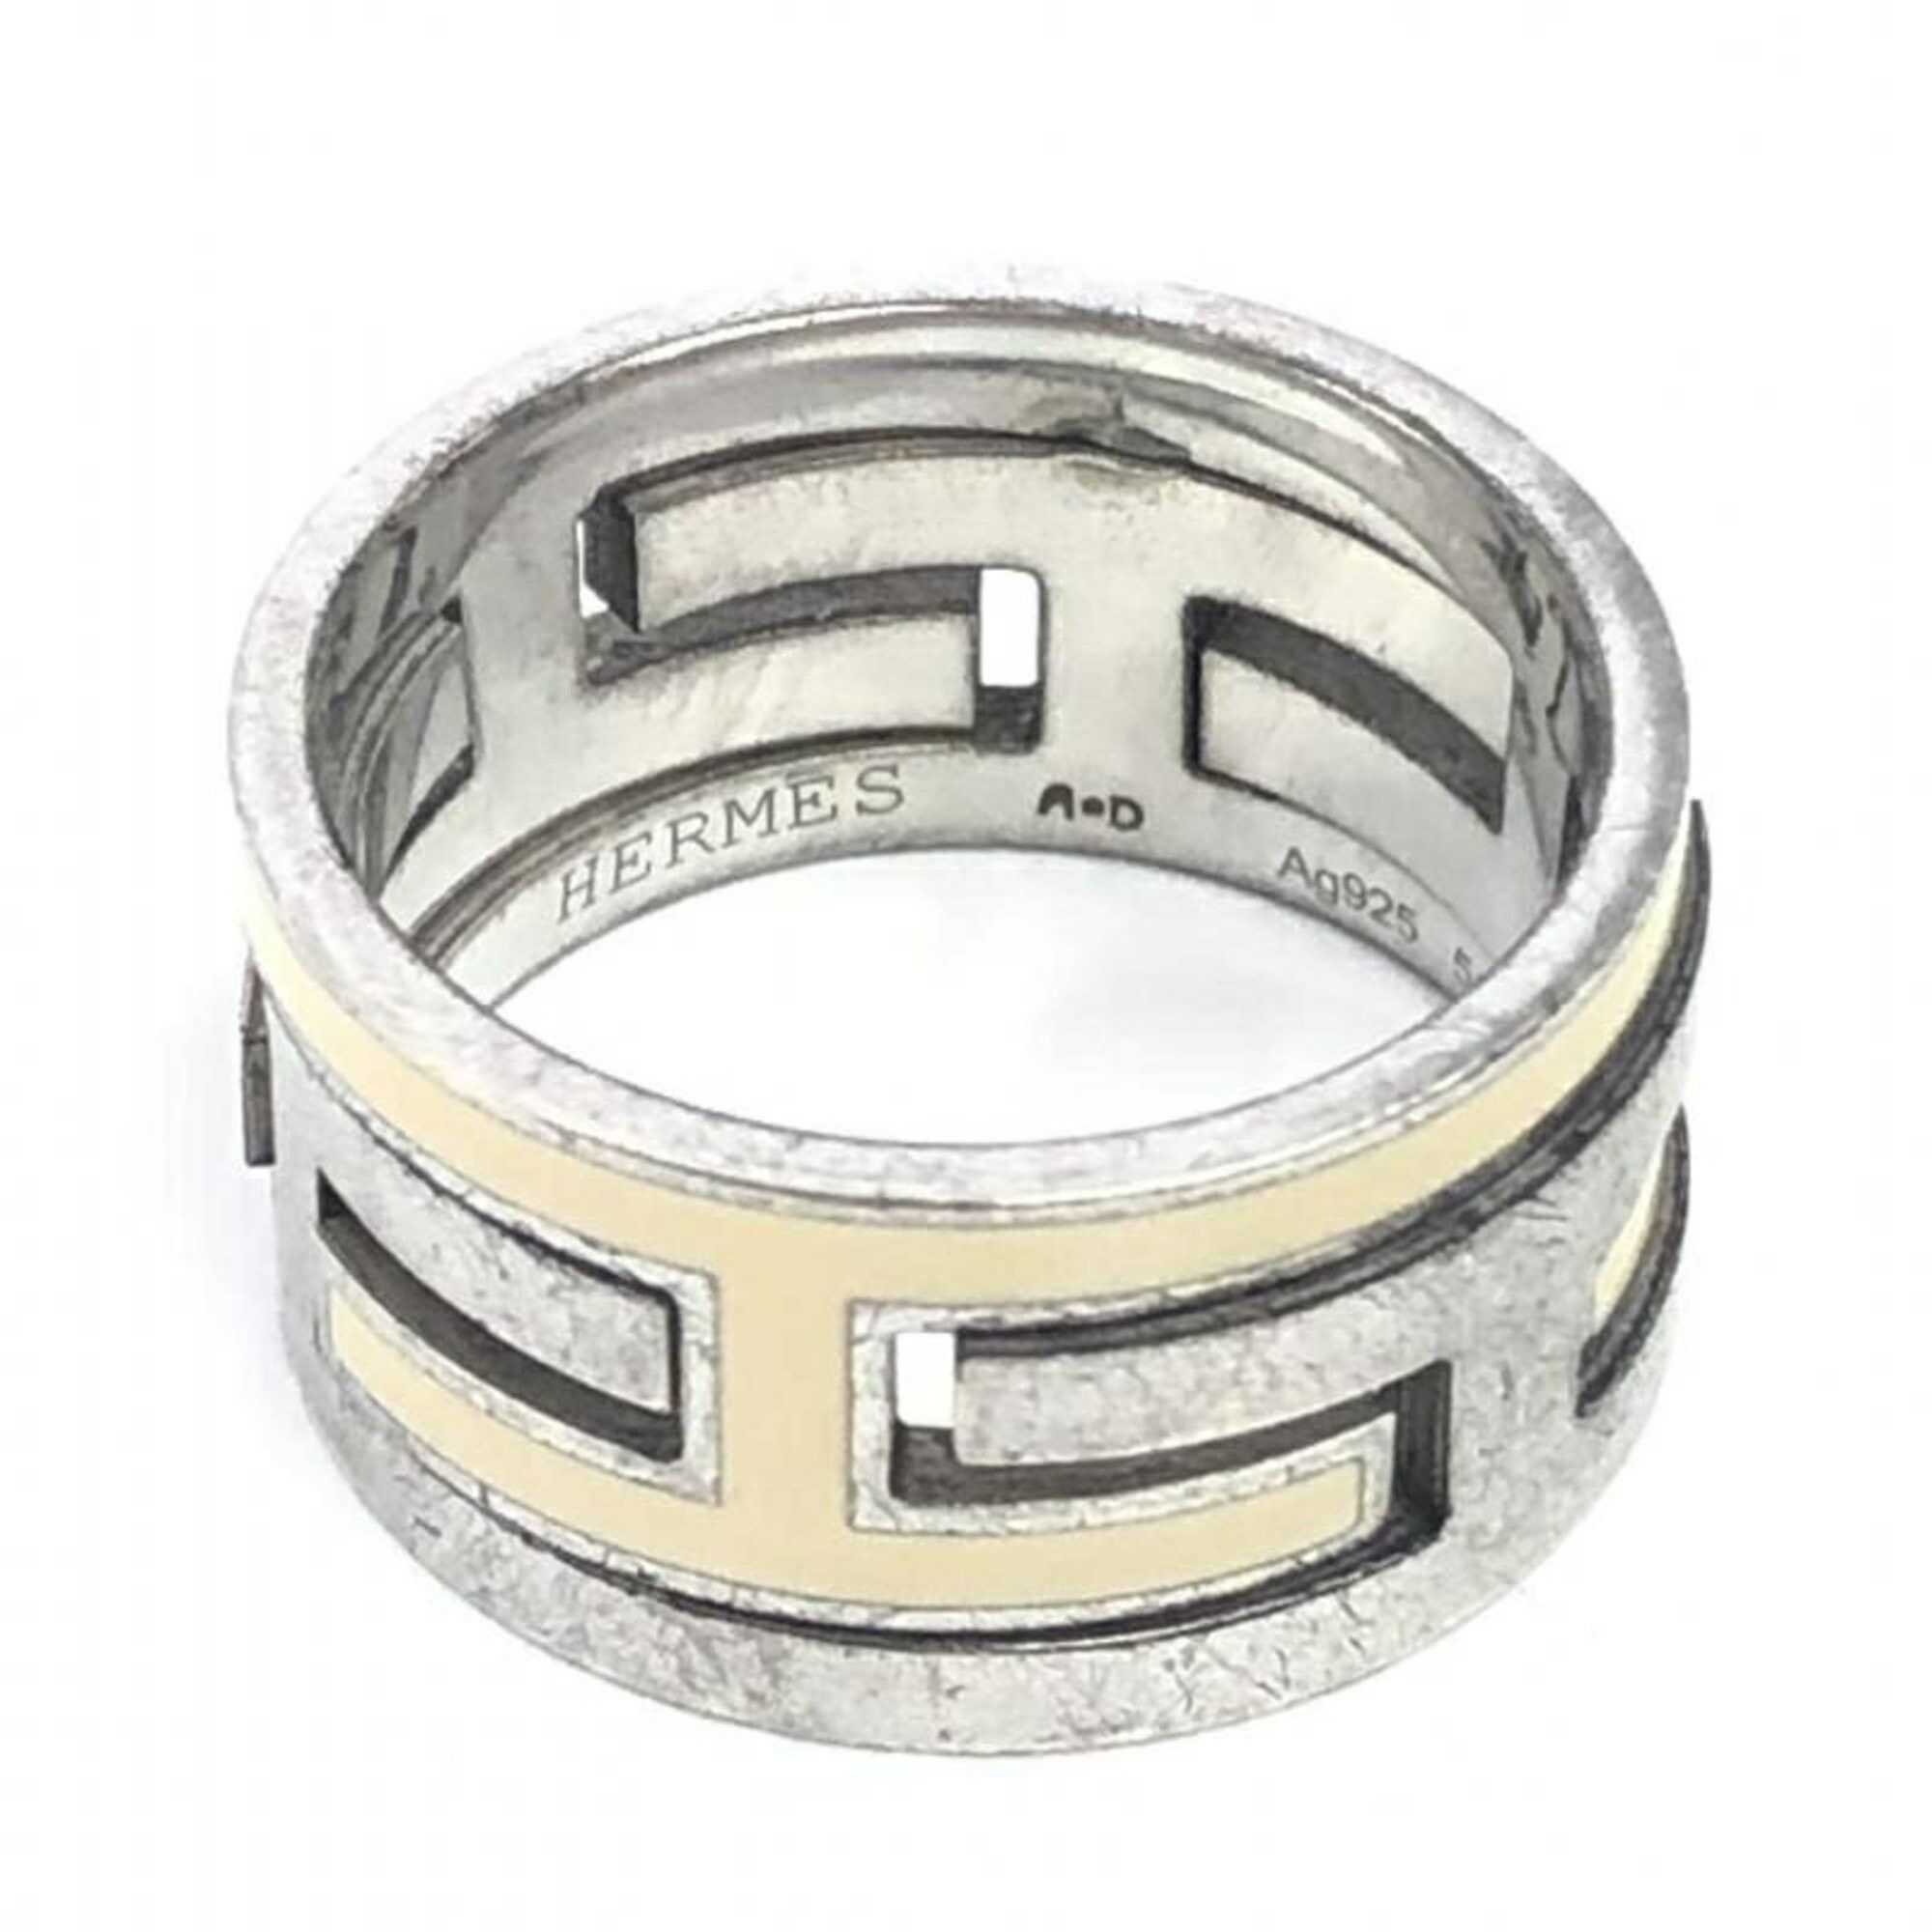 image of Hermes Move Ash Ring No. 11 Hermes in Silver, Women's